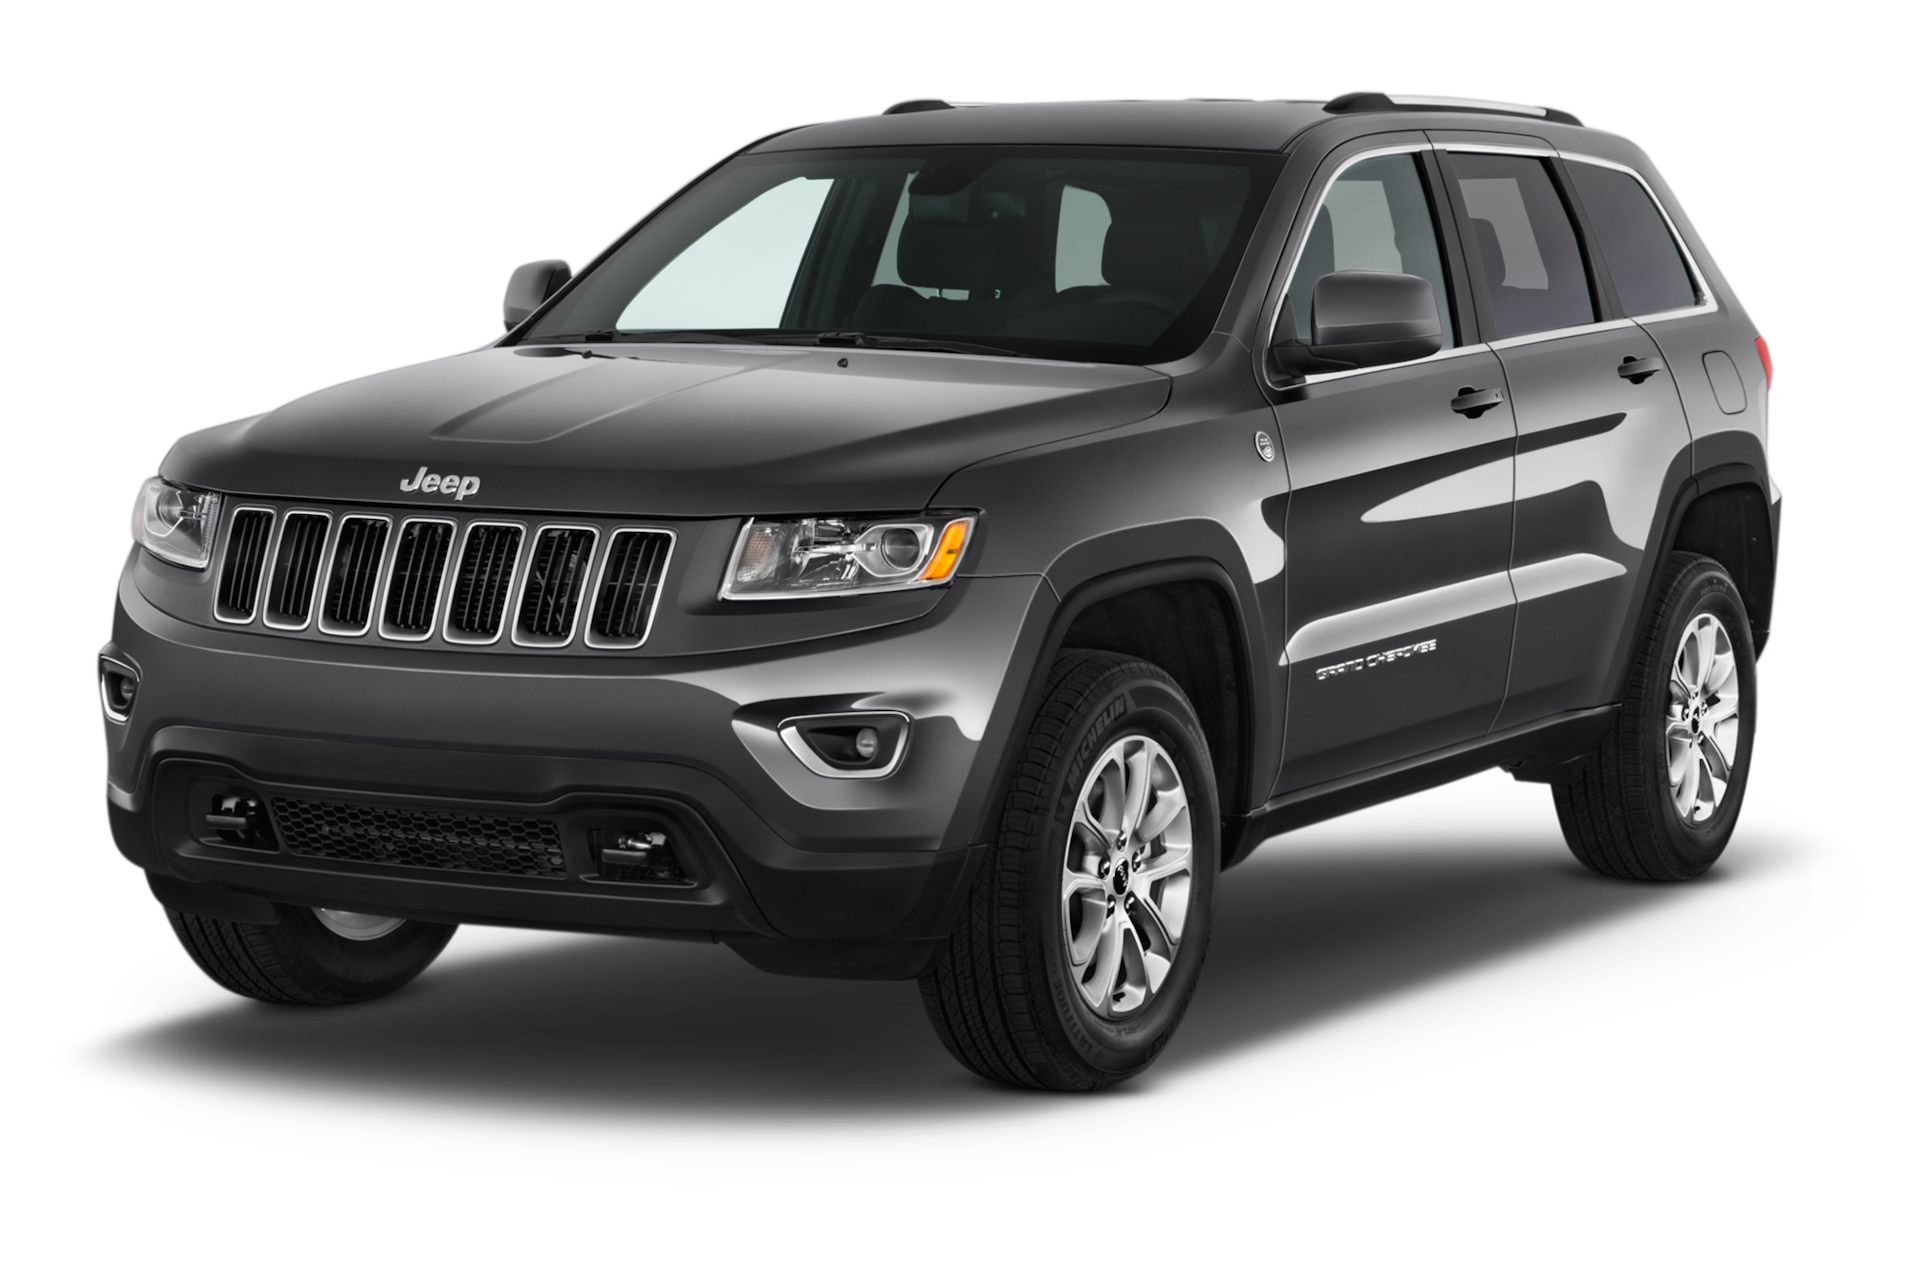 2015 Jeep Grand Cherokee Prices, Reviews, and Photos - MotorTrend